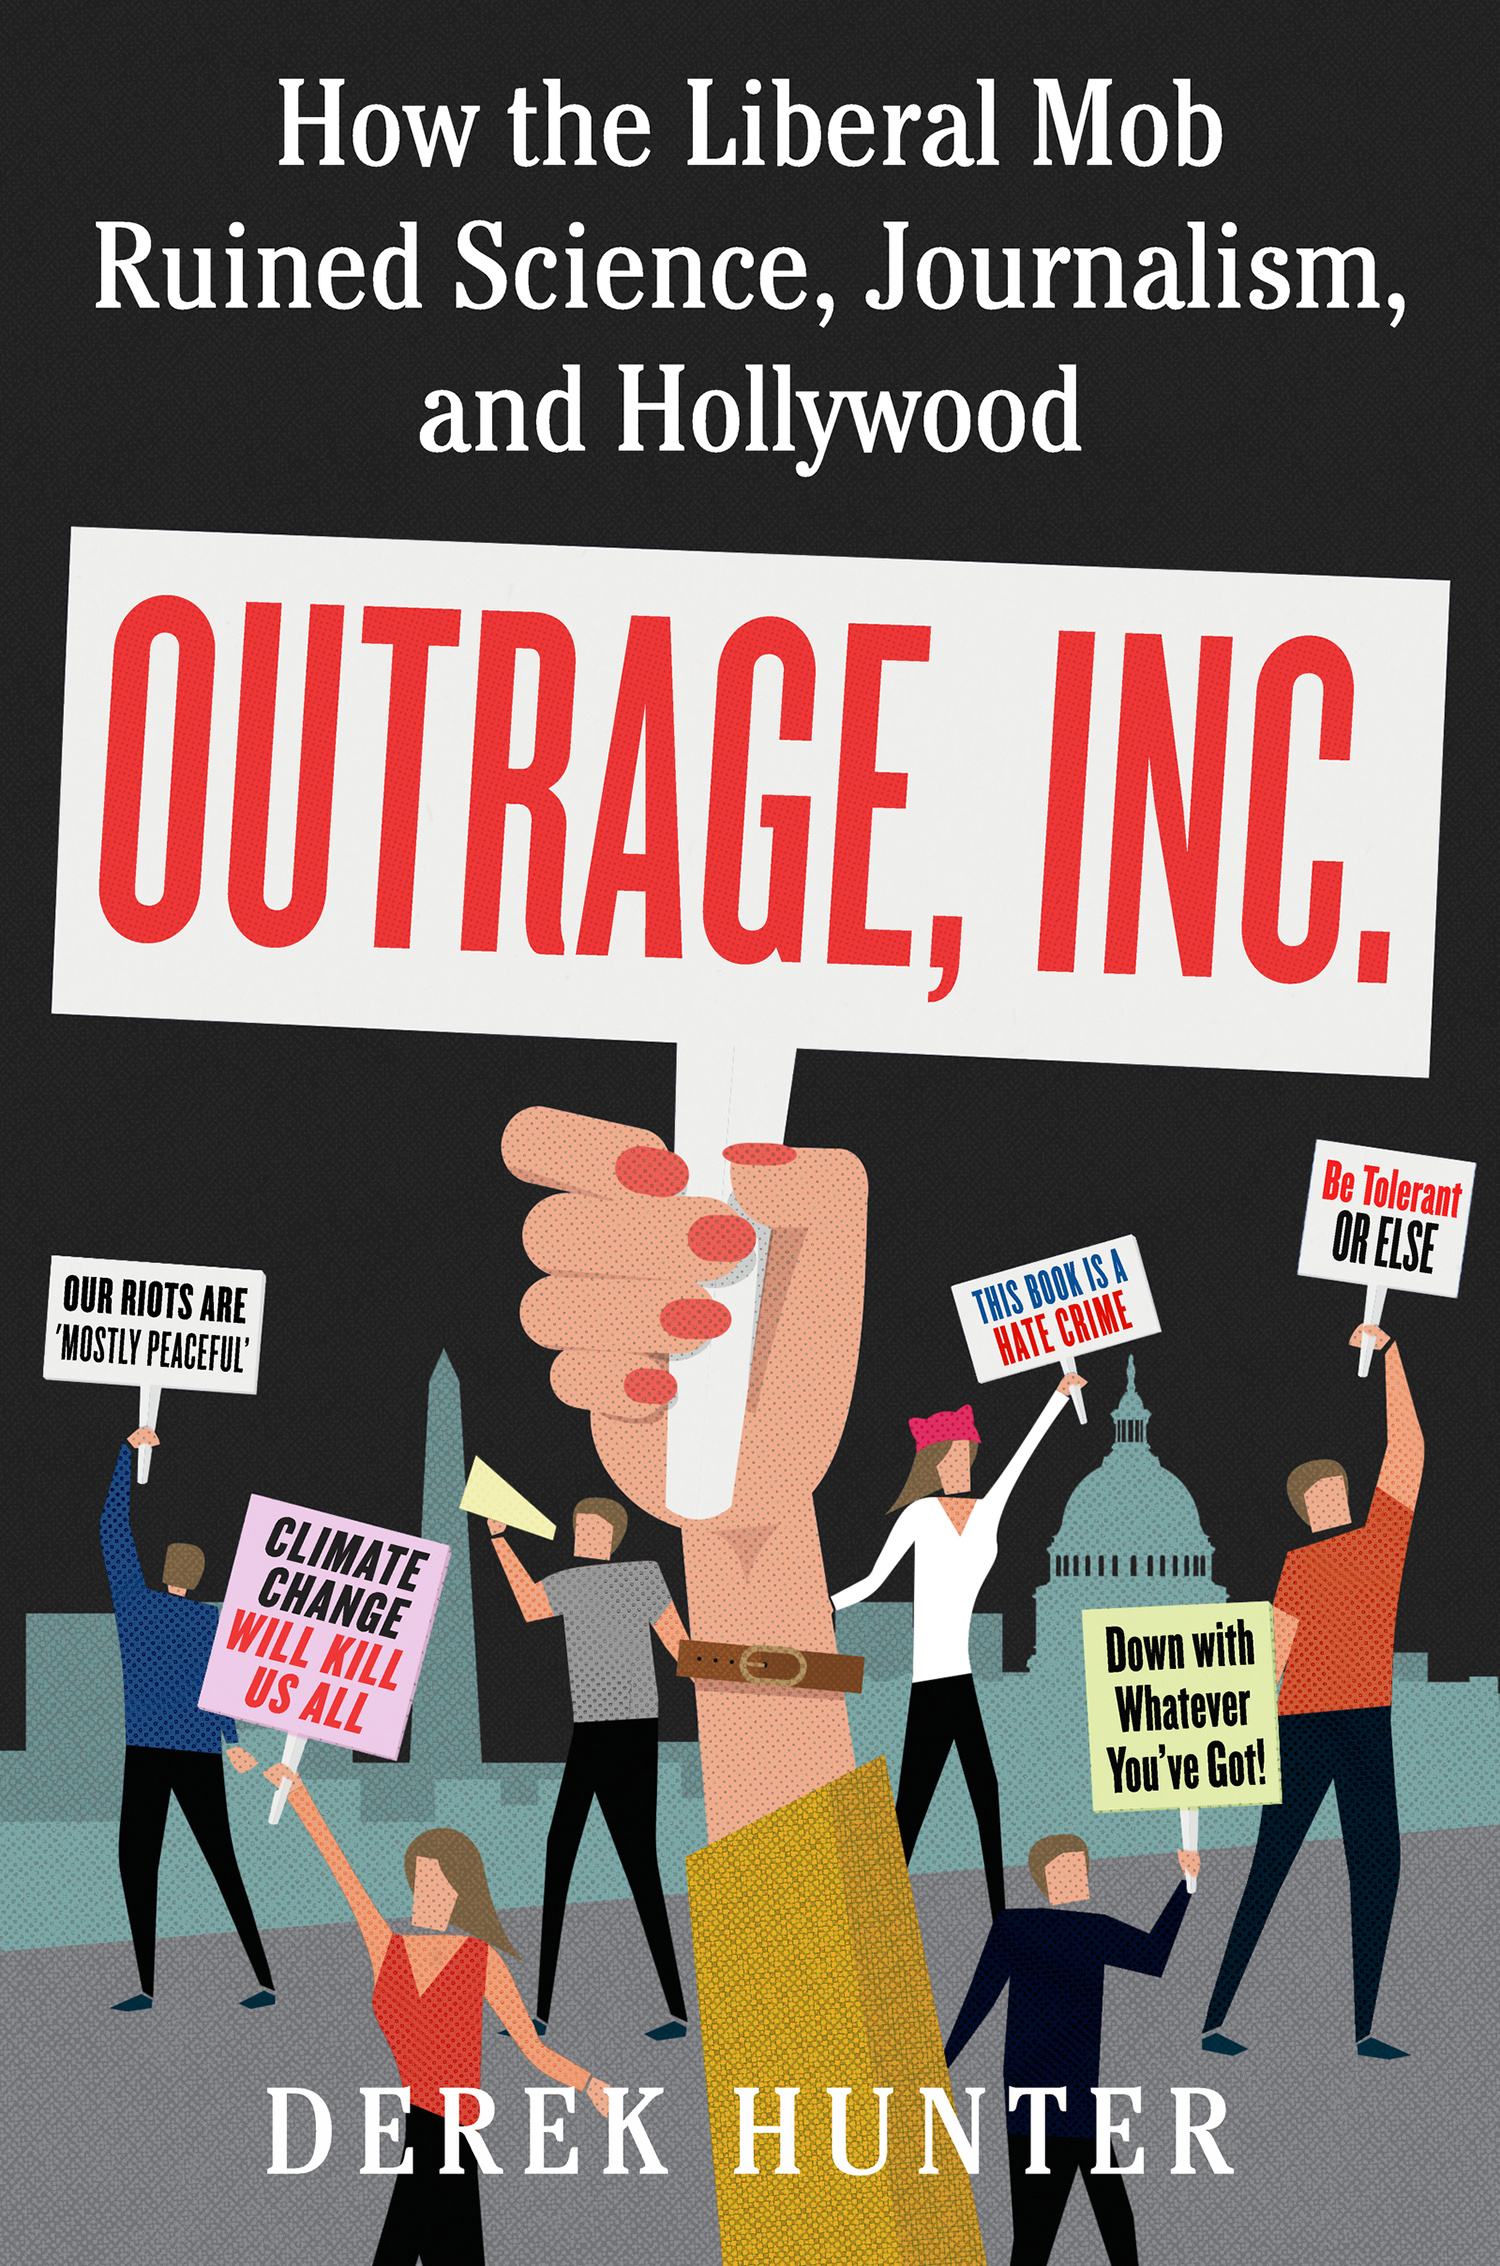 Outrage, Inc.  how the liberal mob ruined science, journalism, and Hollywood cover image